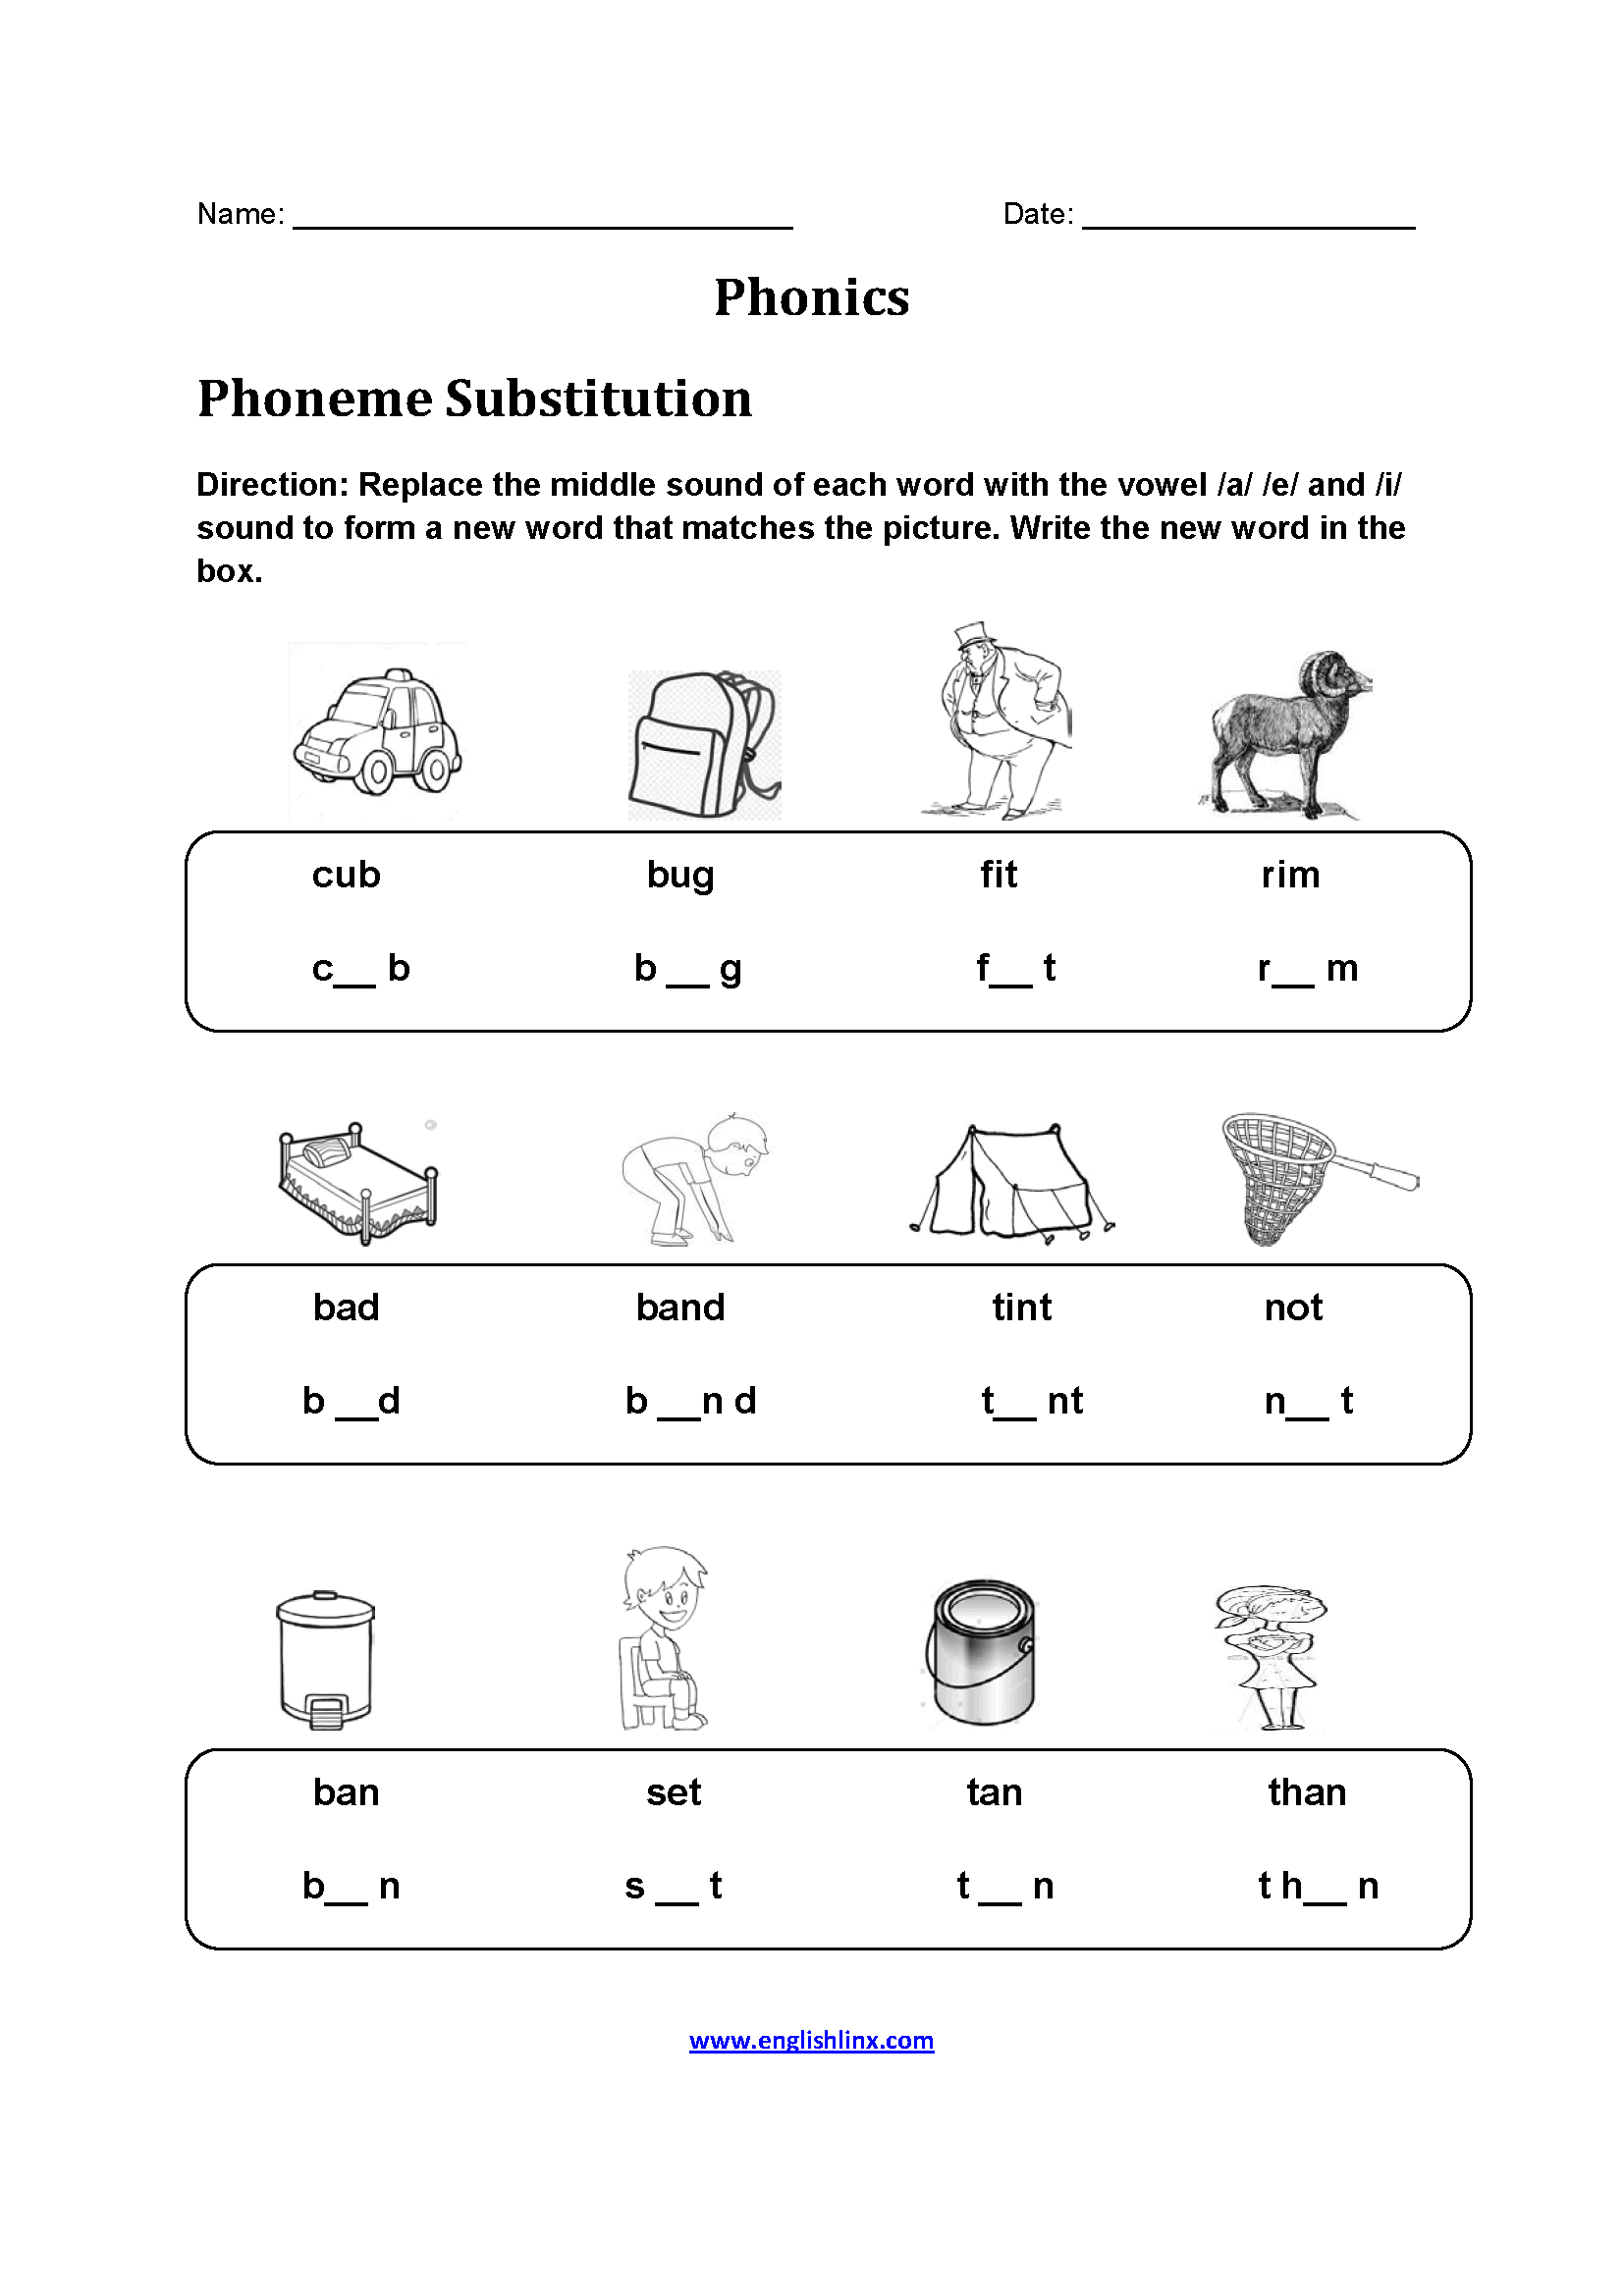 Phoneme Substitution Phonics Worksheets